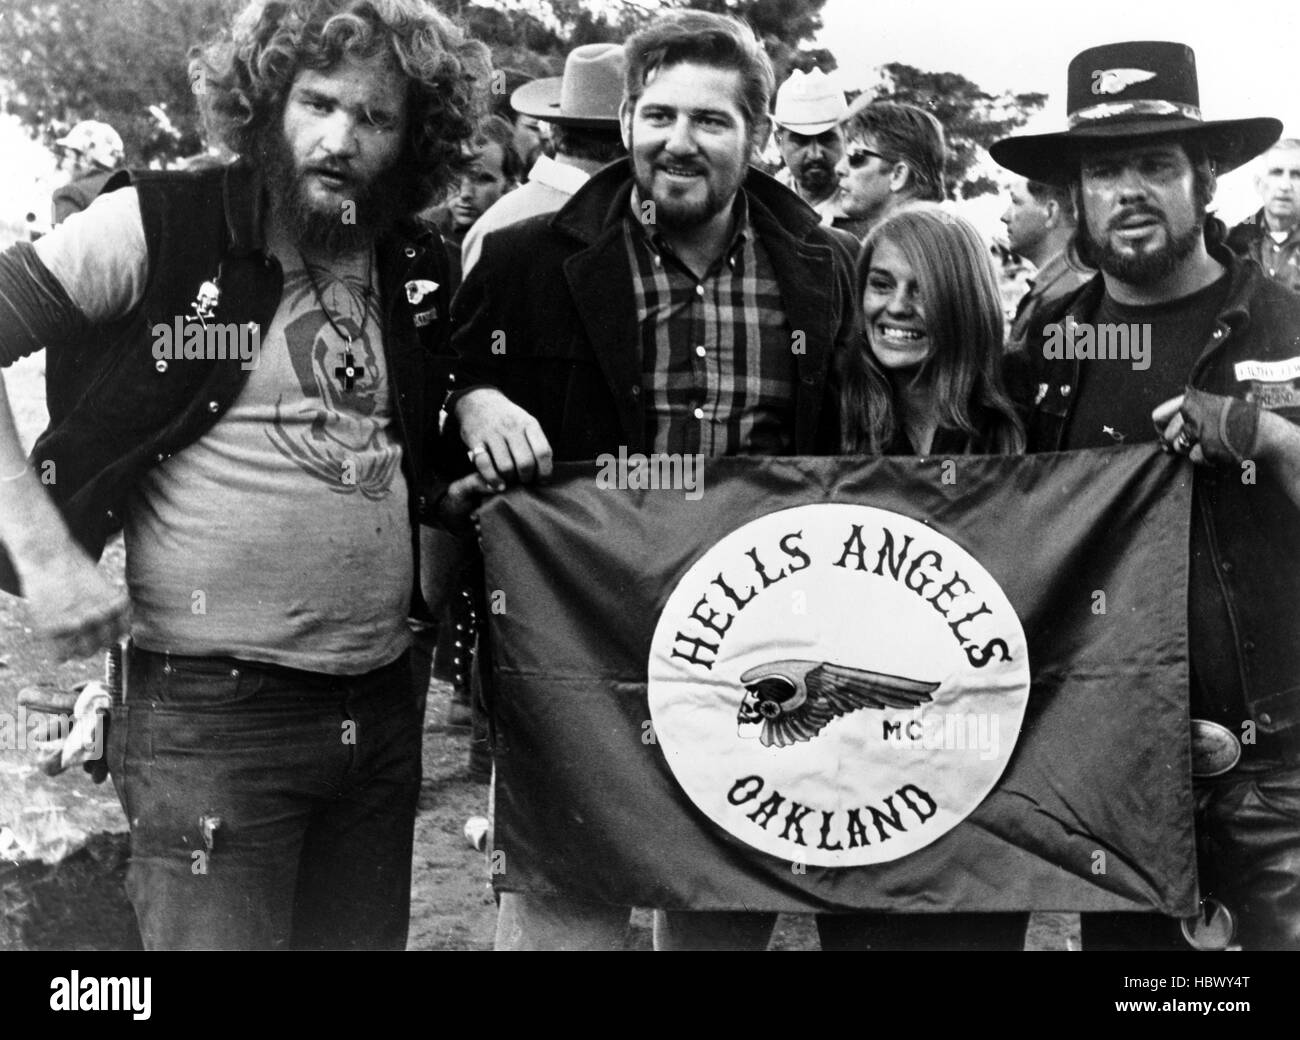 HELL'S ANGELS '69, 1969 Stock Photo